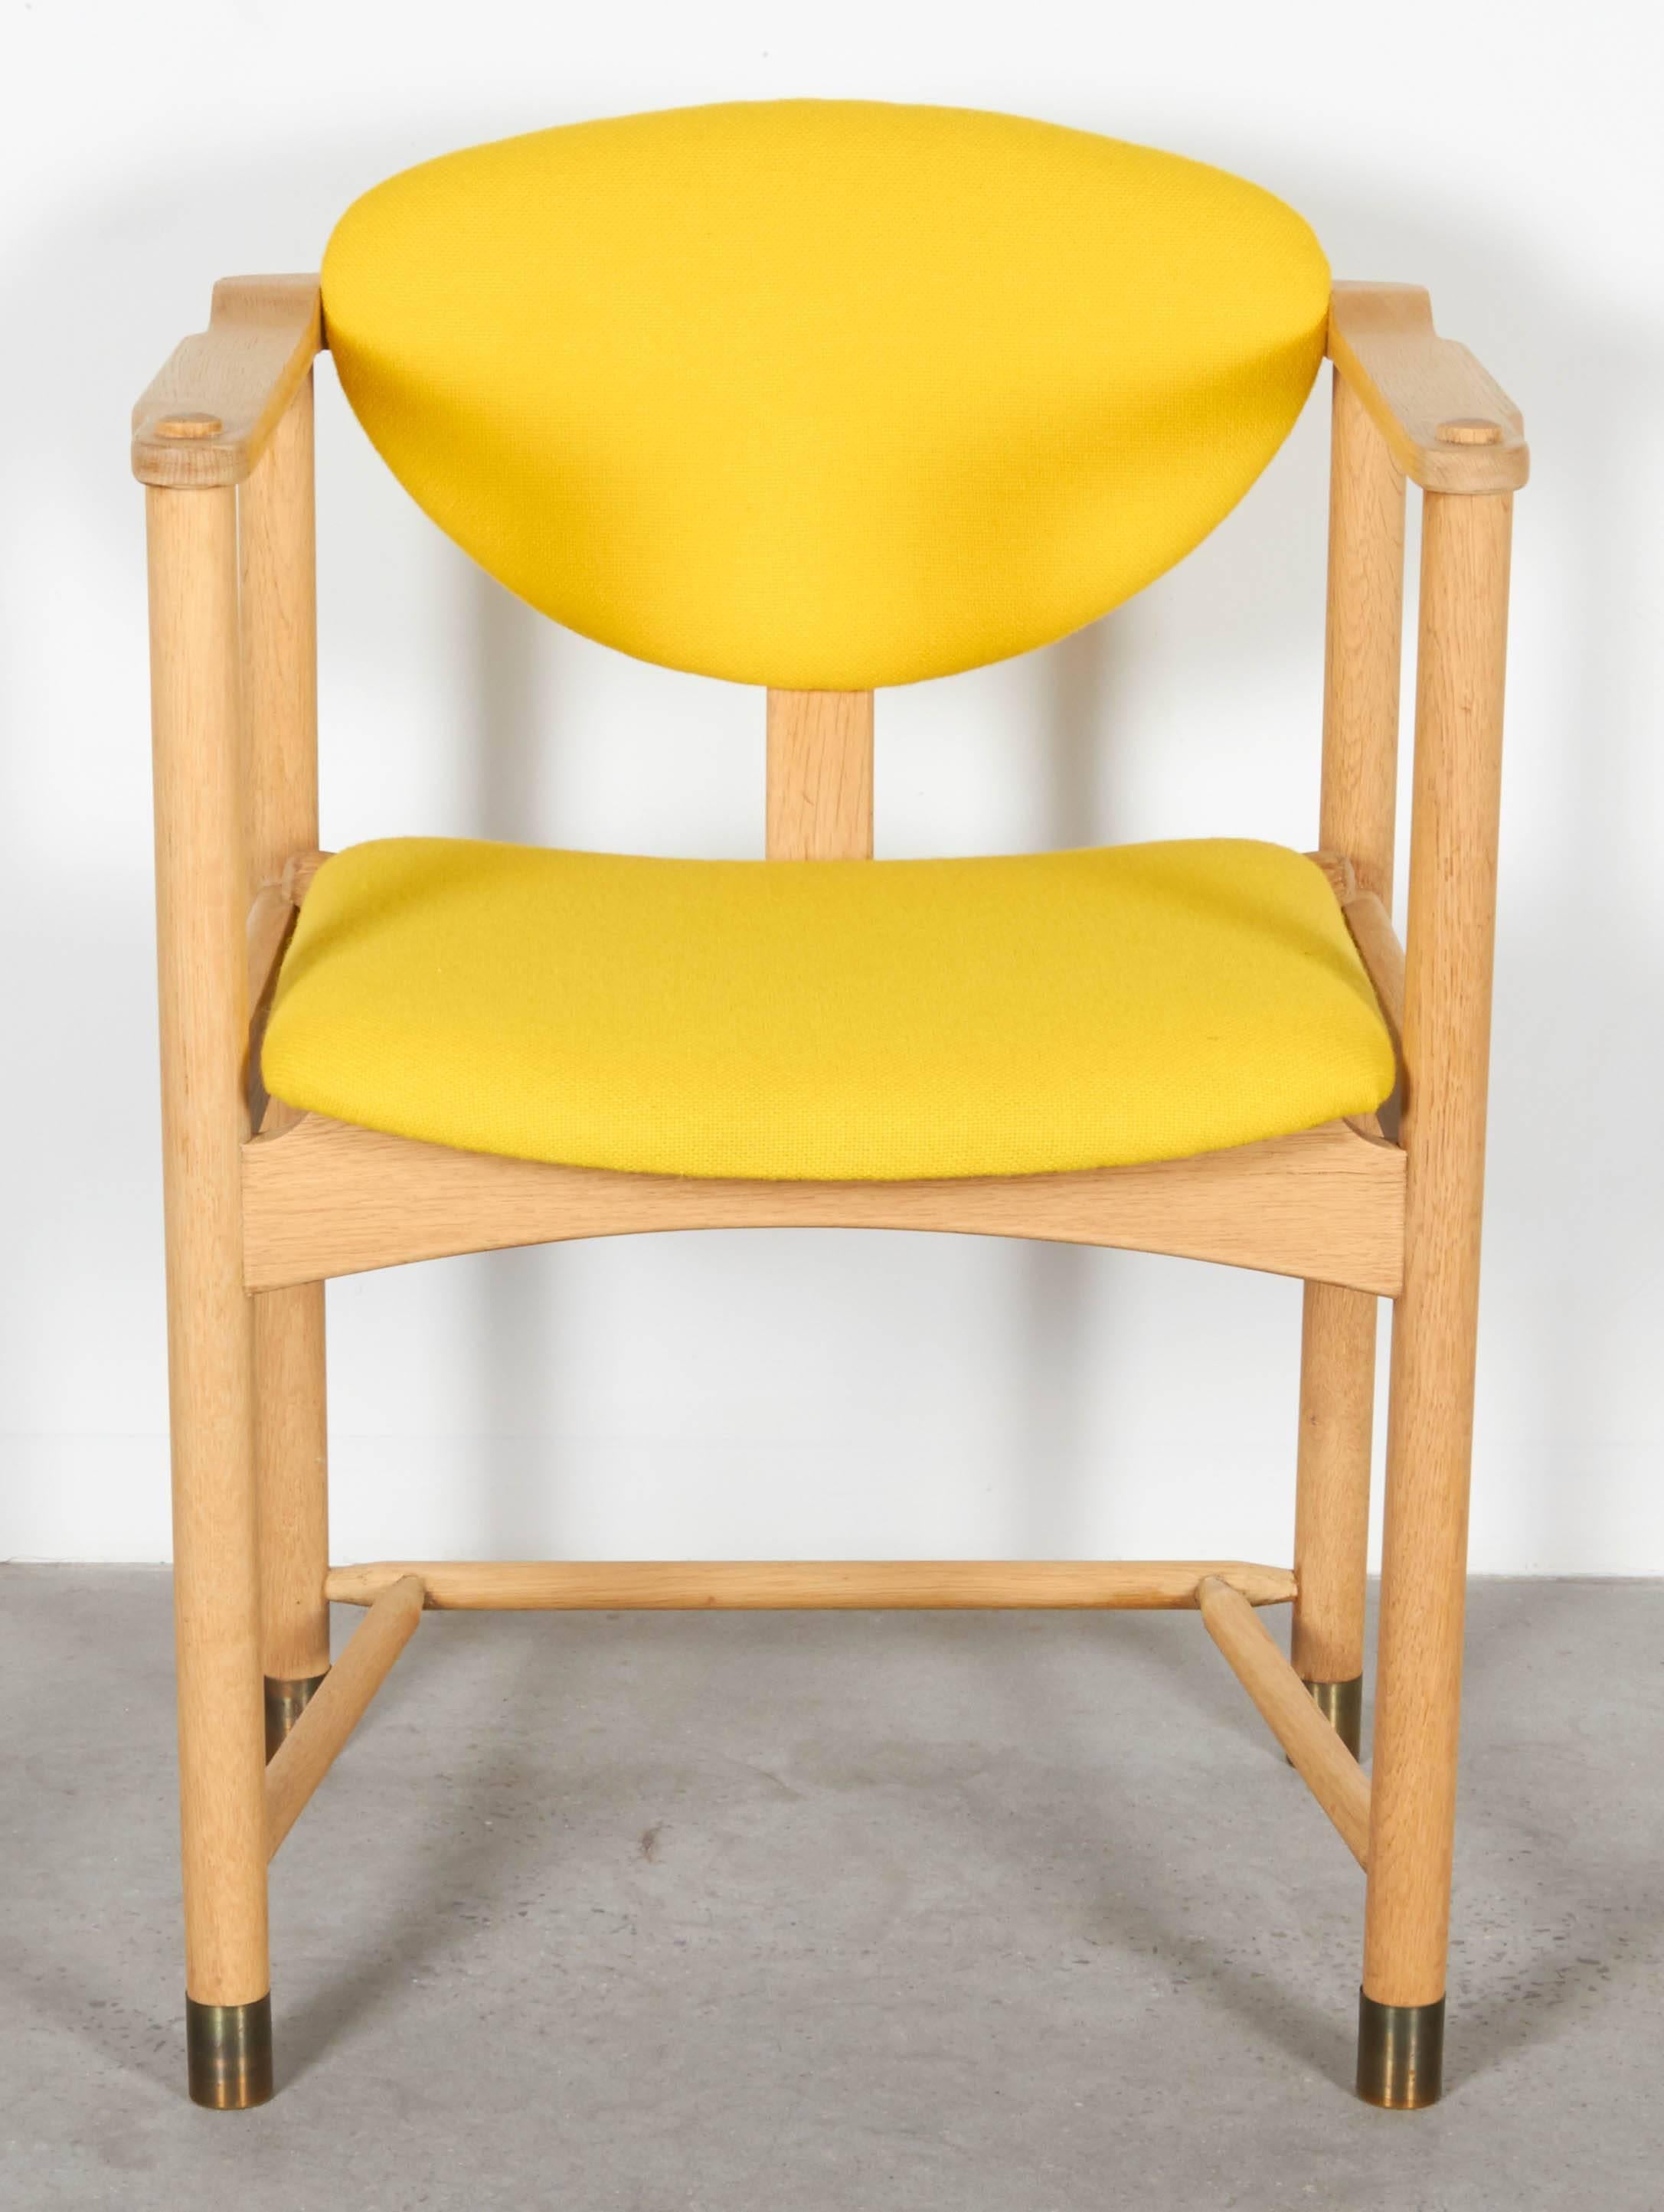 Vintage 1950s Yellow Dining Chairs by Bjorn Engo

Wonderful large set of eight oak dining chairs by the Norwegian artist Bjorn Engo. Perfectly cleaned frames and recent yellow upholstery. Sturdy, rustic, rare and compelling. Ready for pick up,